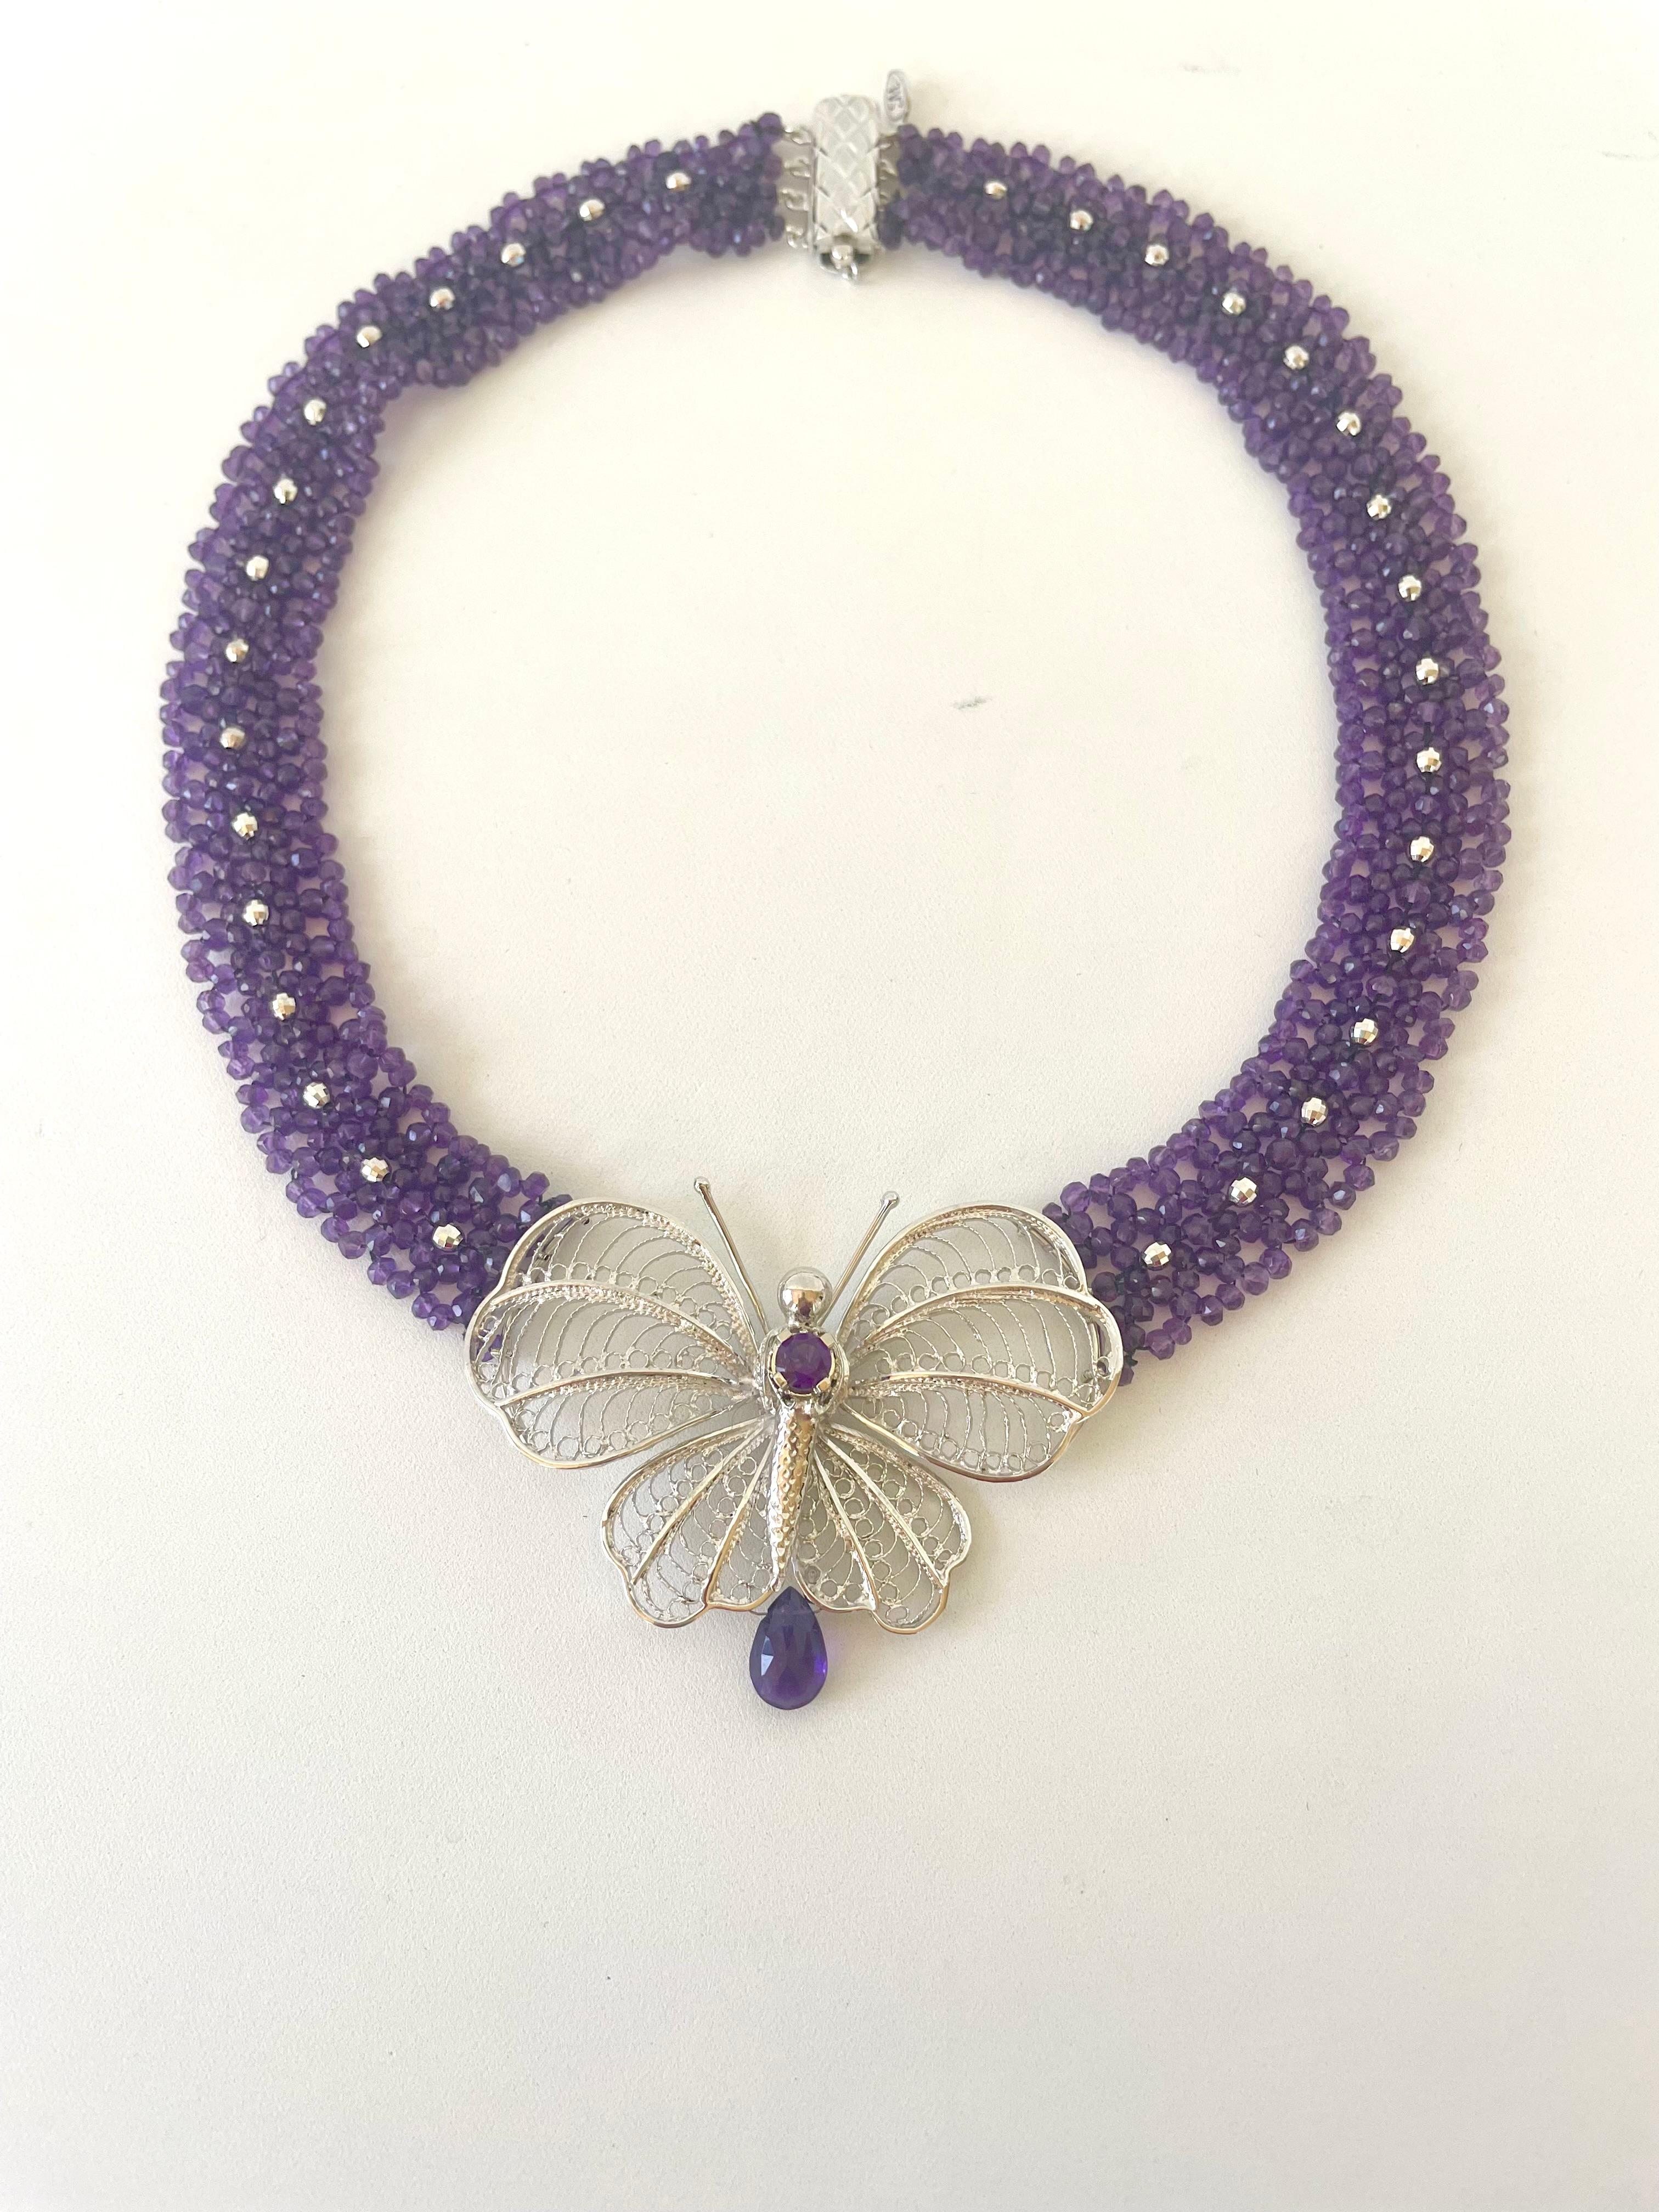 Woven Amethyst Necklace with Silver Butterfly Centerpiece For Sale 3